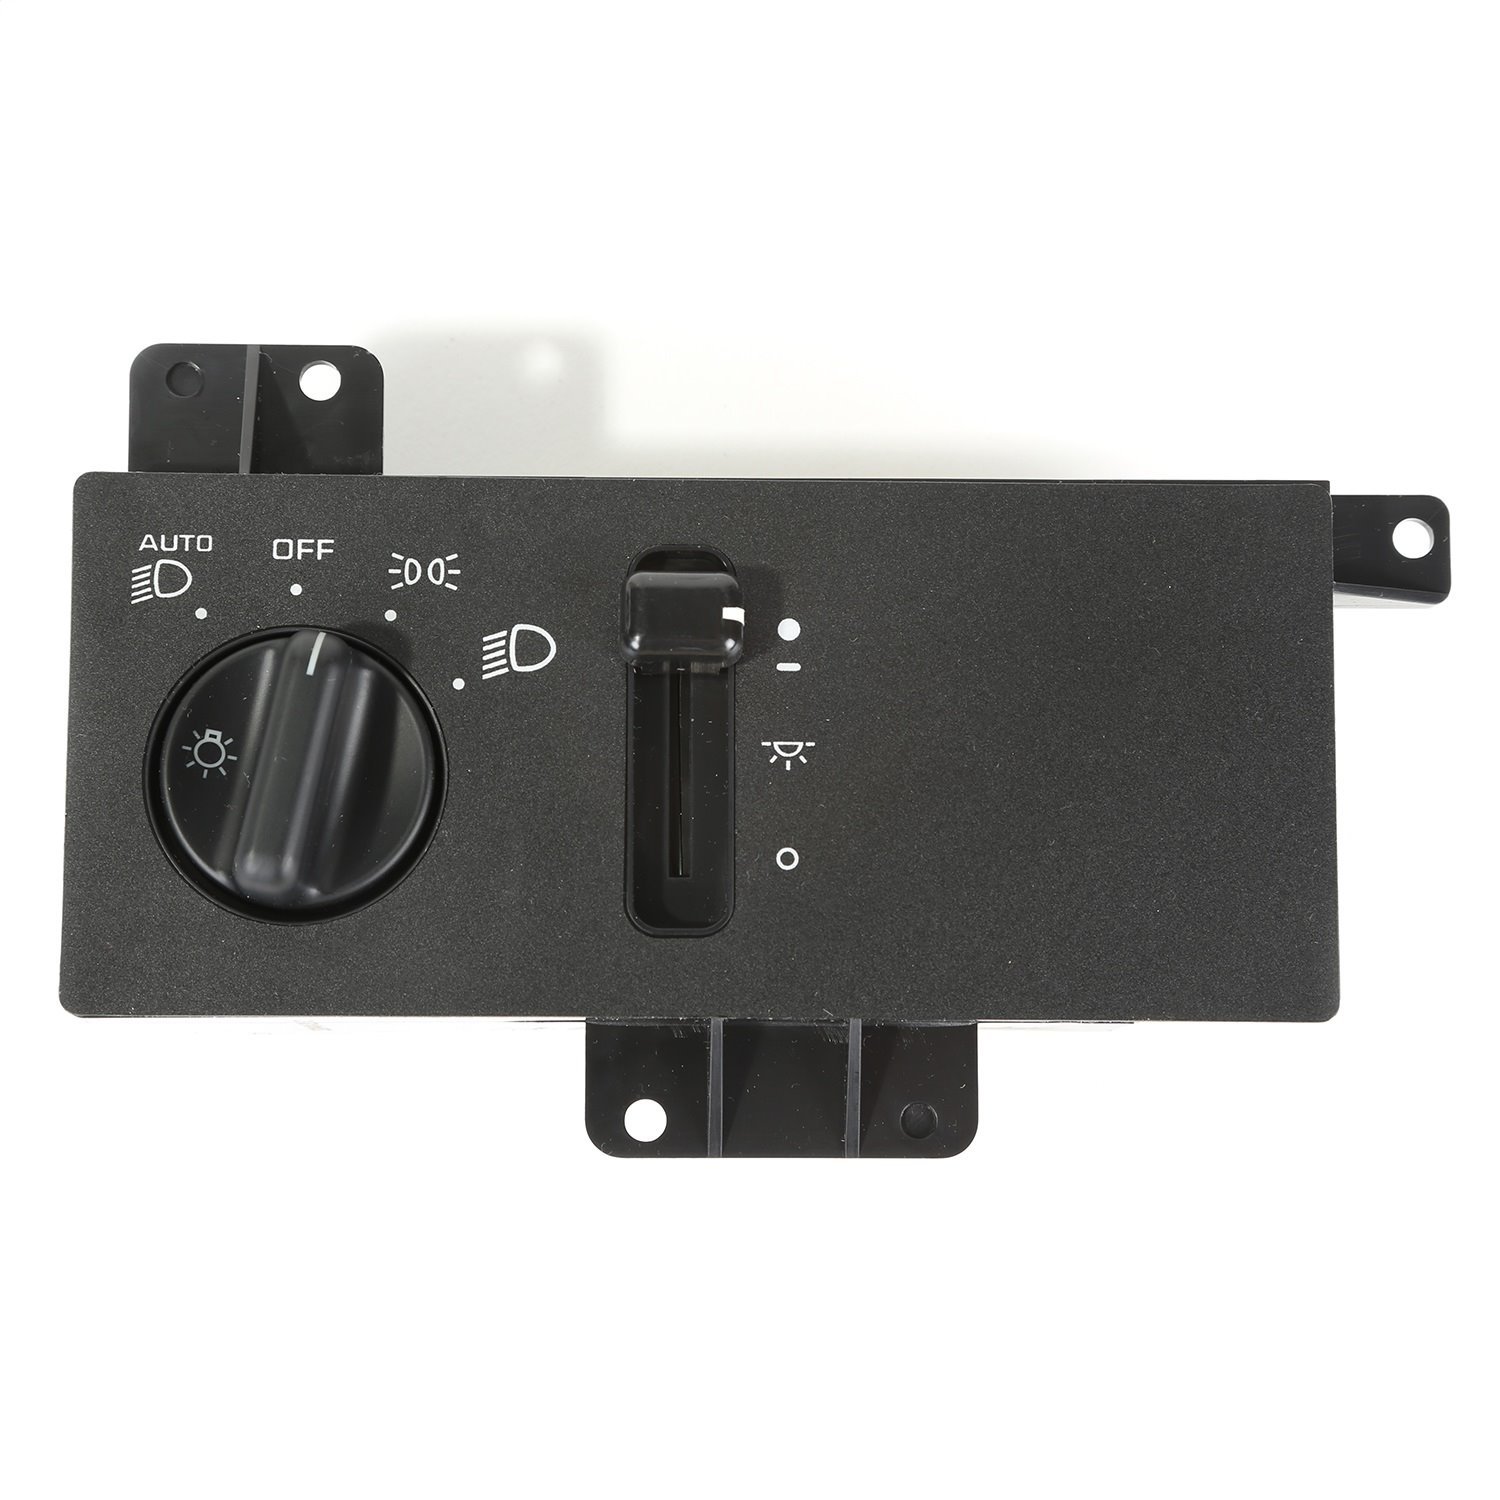 This headlight switch from Omix-ADA fits 96-98 Jeep Grand Cherokees without fog lights but with automatic headlights.